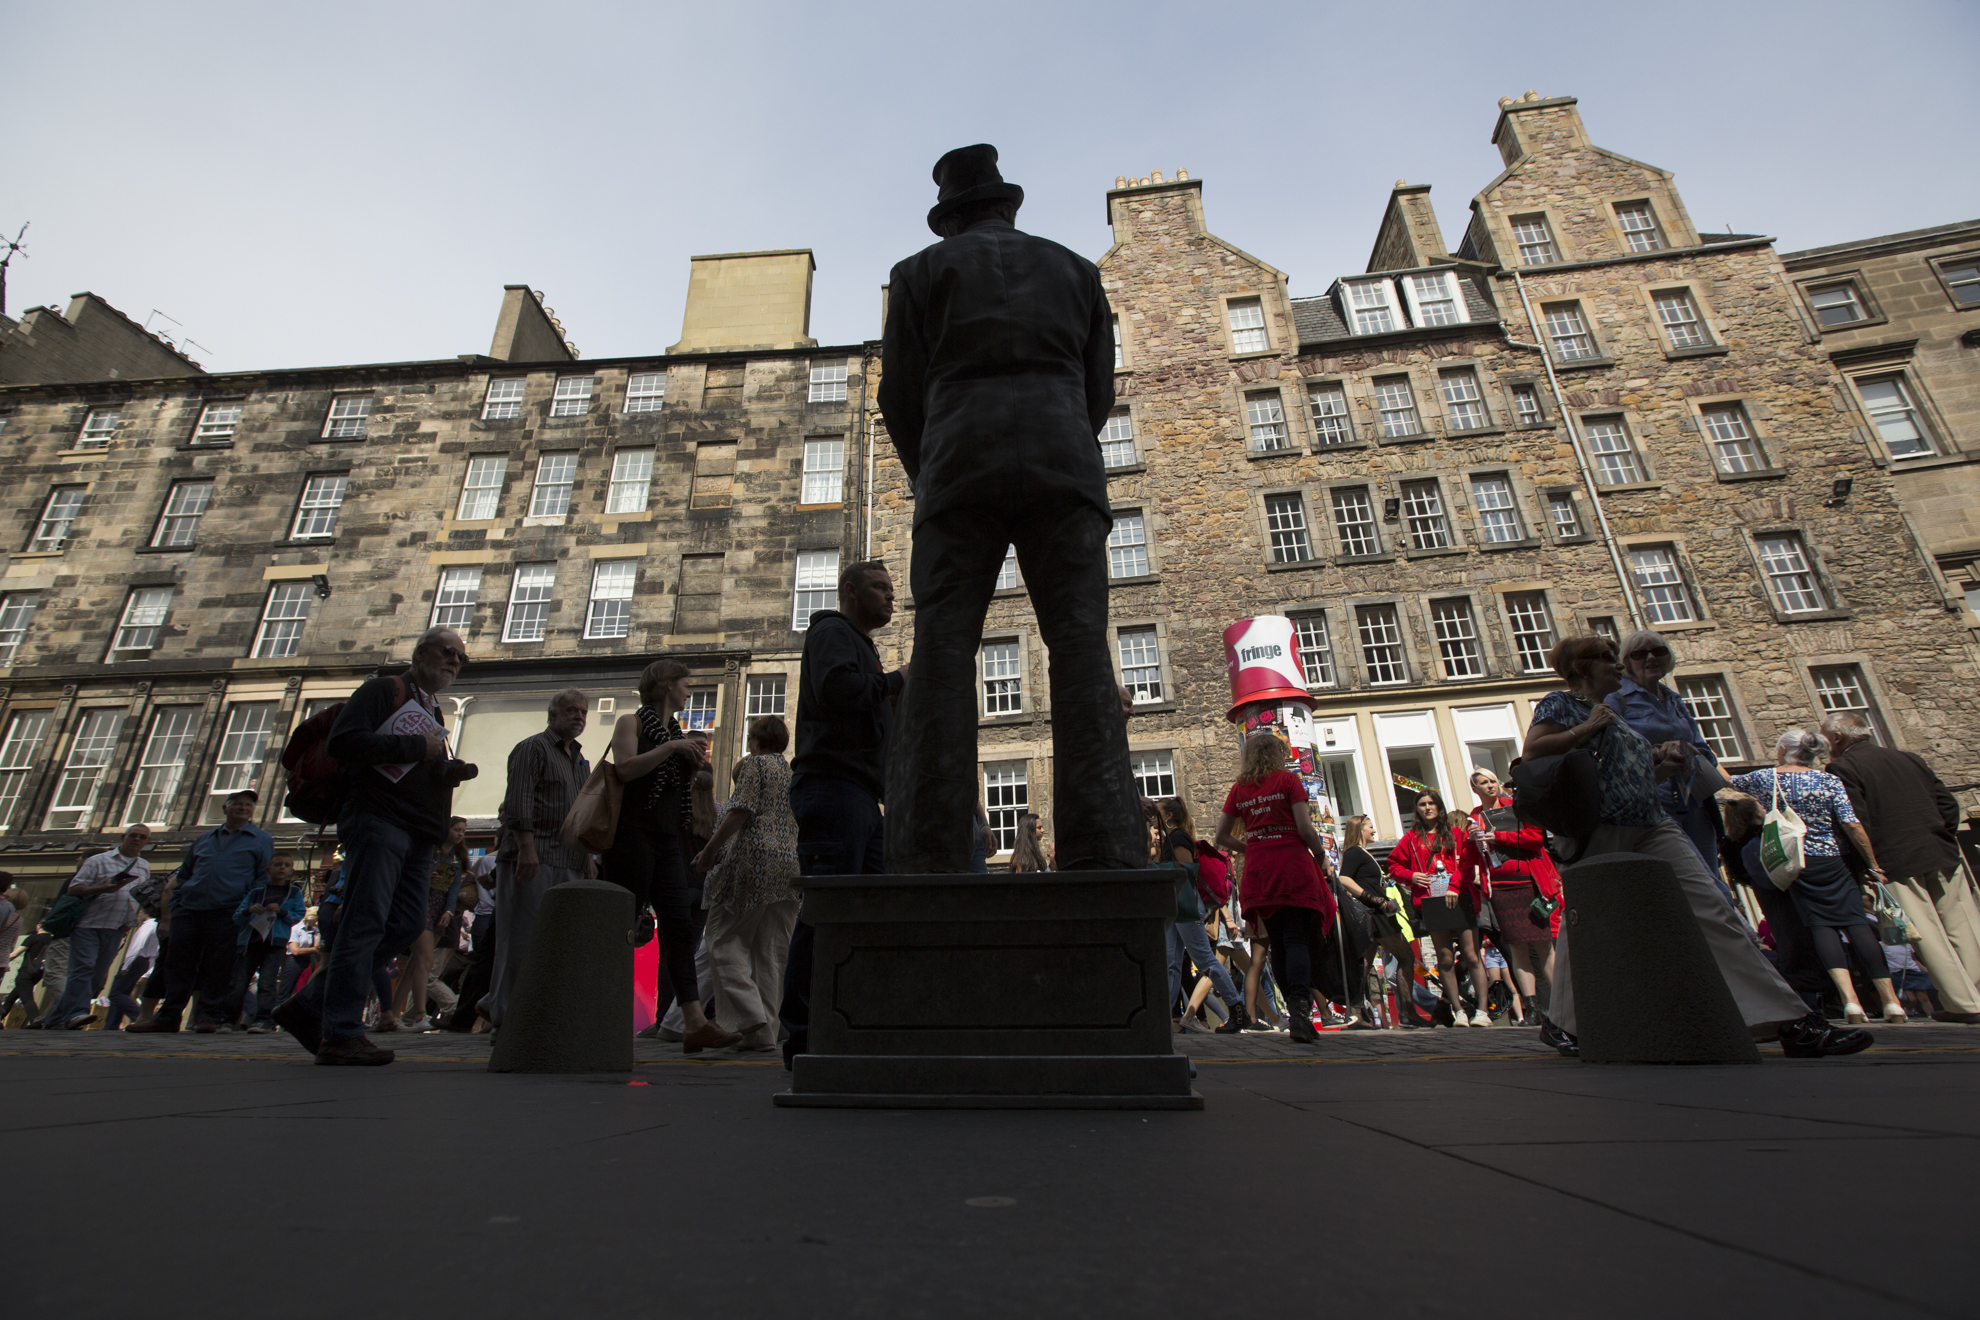  John Godbolt, from Bristol, England, stands in front of St. Giles Cathedral on the Royal Mile during the 2014 Edinburgh Festival of the Fringe in Edinburgh, Scotland.    